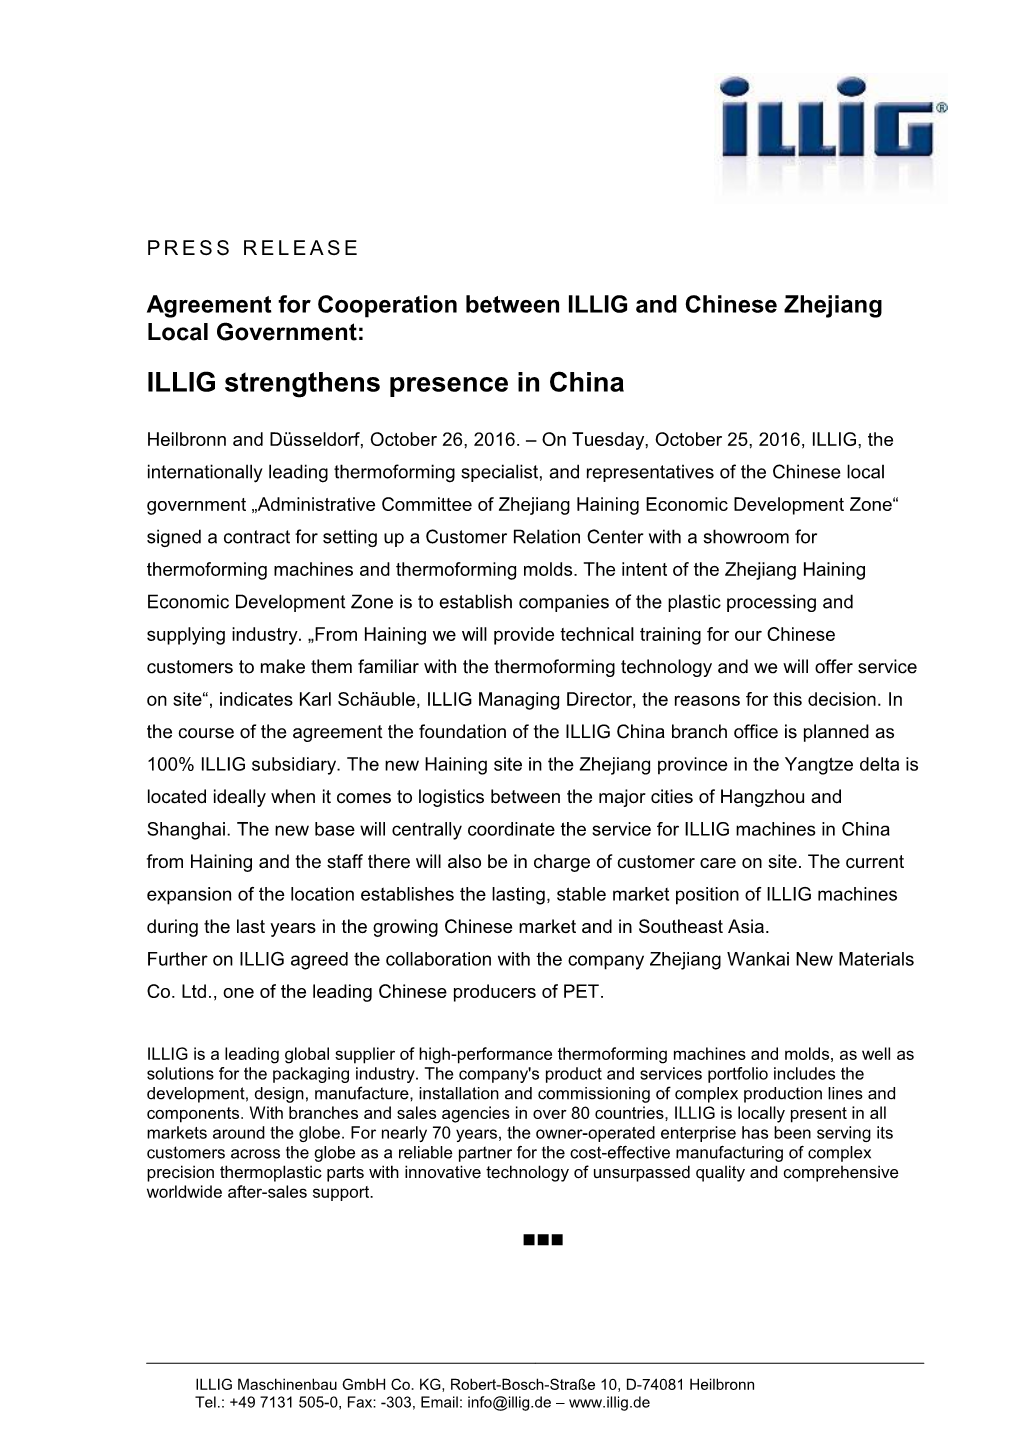 Agreement for Cooperation Between ILLIG and Chinese Zhejiang Local Government